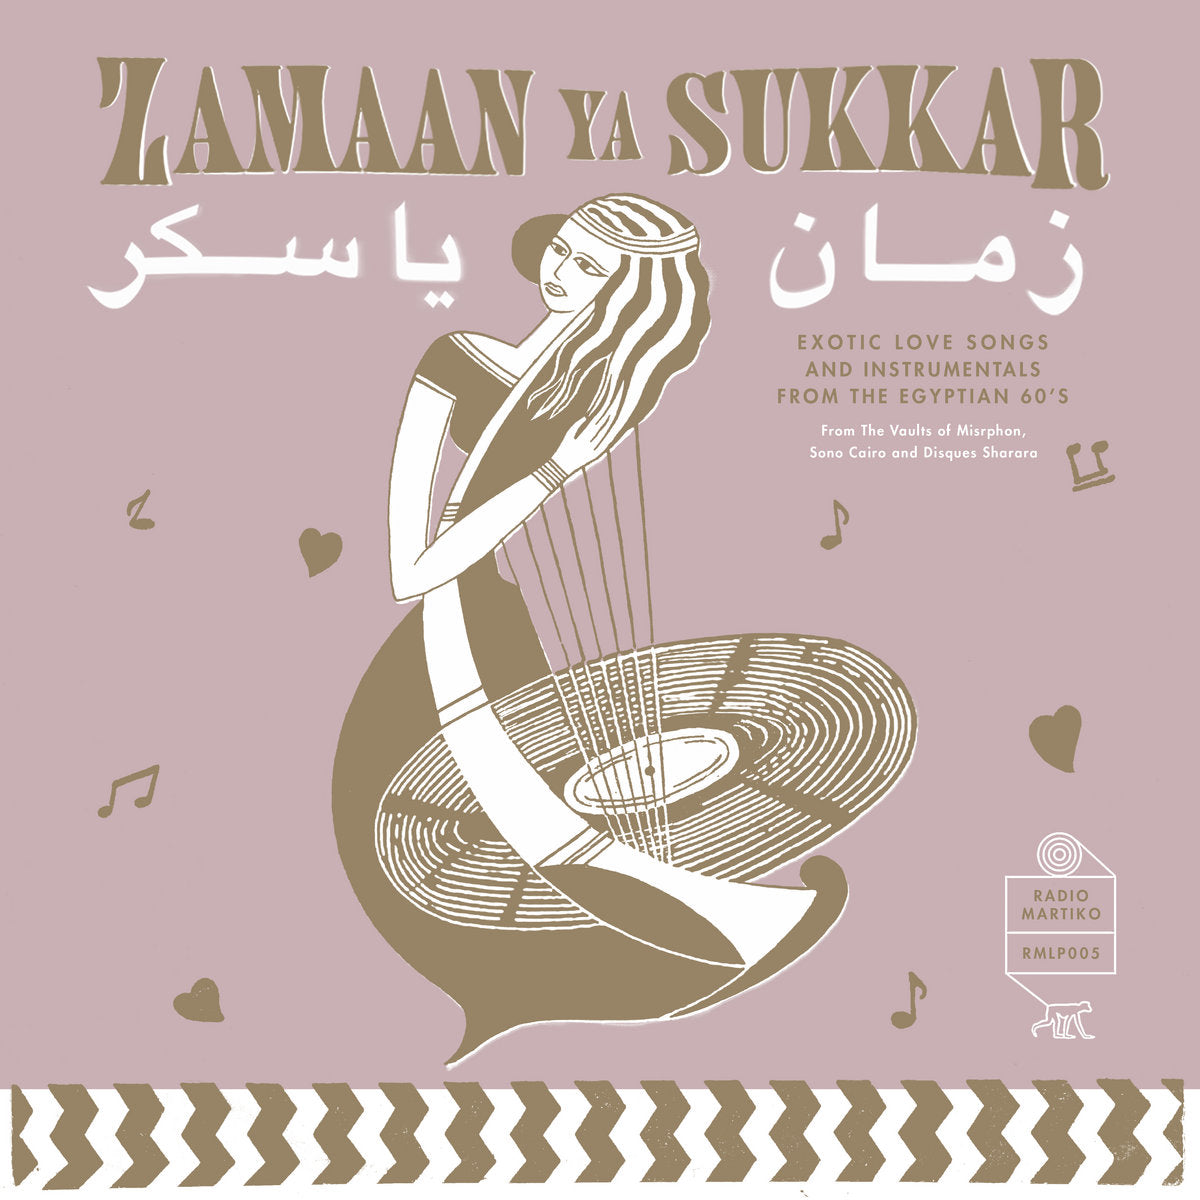 V/A - Zamaan Ya Sukkar - Exotic Love Songs And Instrumentals From The Egyptian 60's - LP